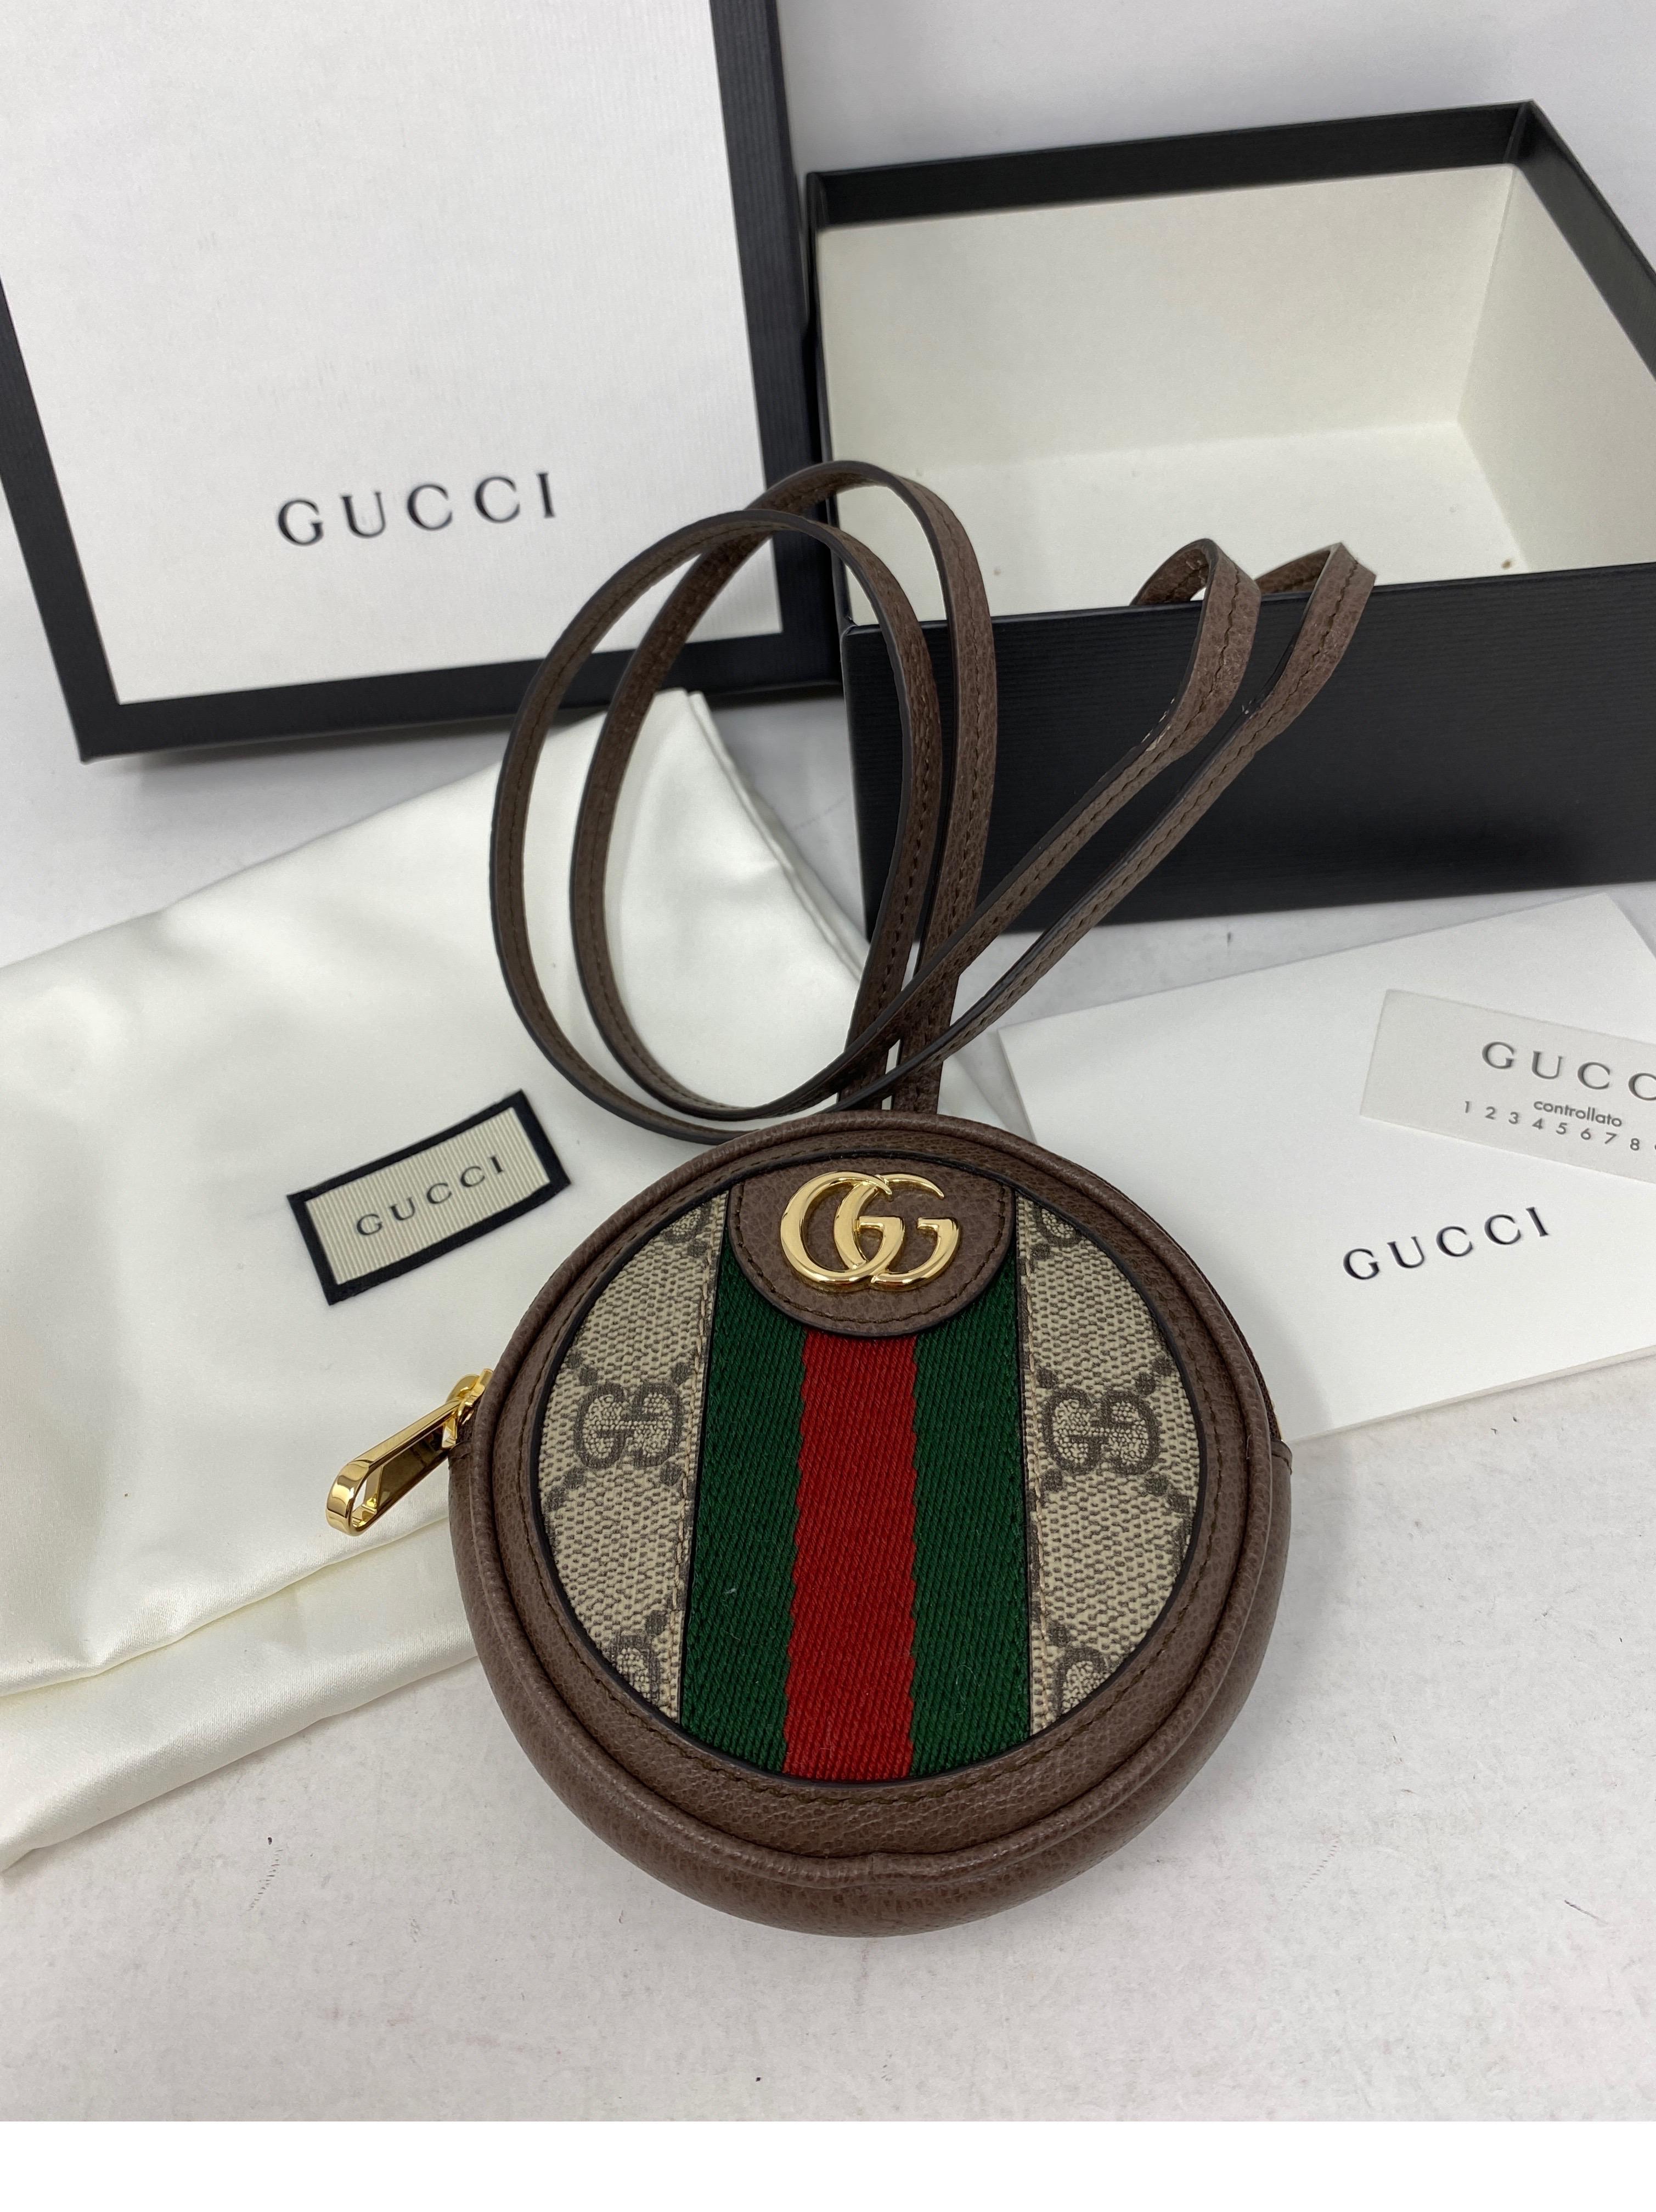 Gucci Mini Coin Purse Crossbody Bag. Gucci monogram with red and green stripe. Brand new condition. Rare and hard to find collector's piece. Cute mini pouch or coin purse. Includes dust cover and box. Guaranted authentic. 